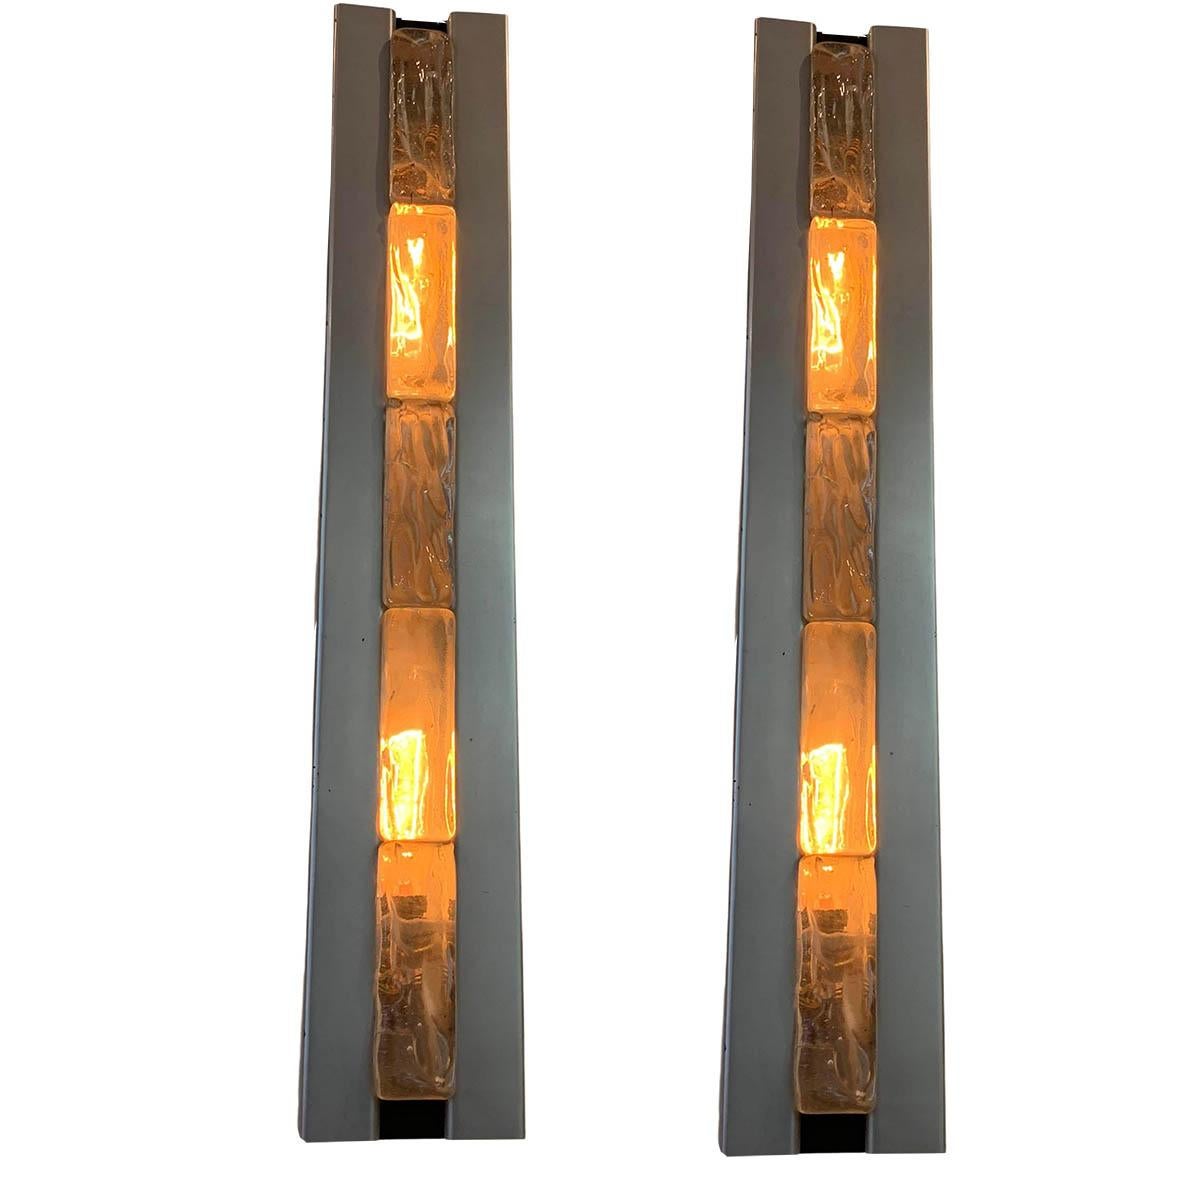 Pair of French Art Deco Sconces with 5 Saint Gobain Glass Bricks, circa 1970 For Sale 5